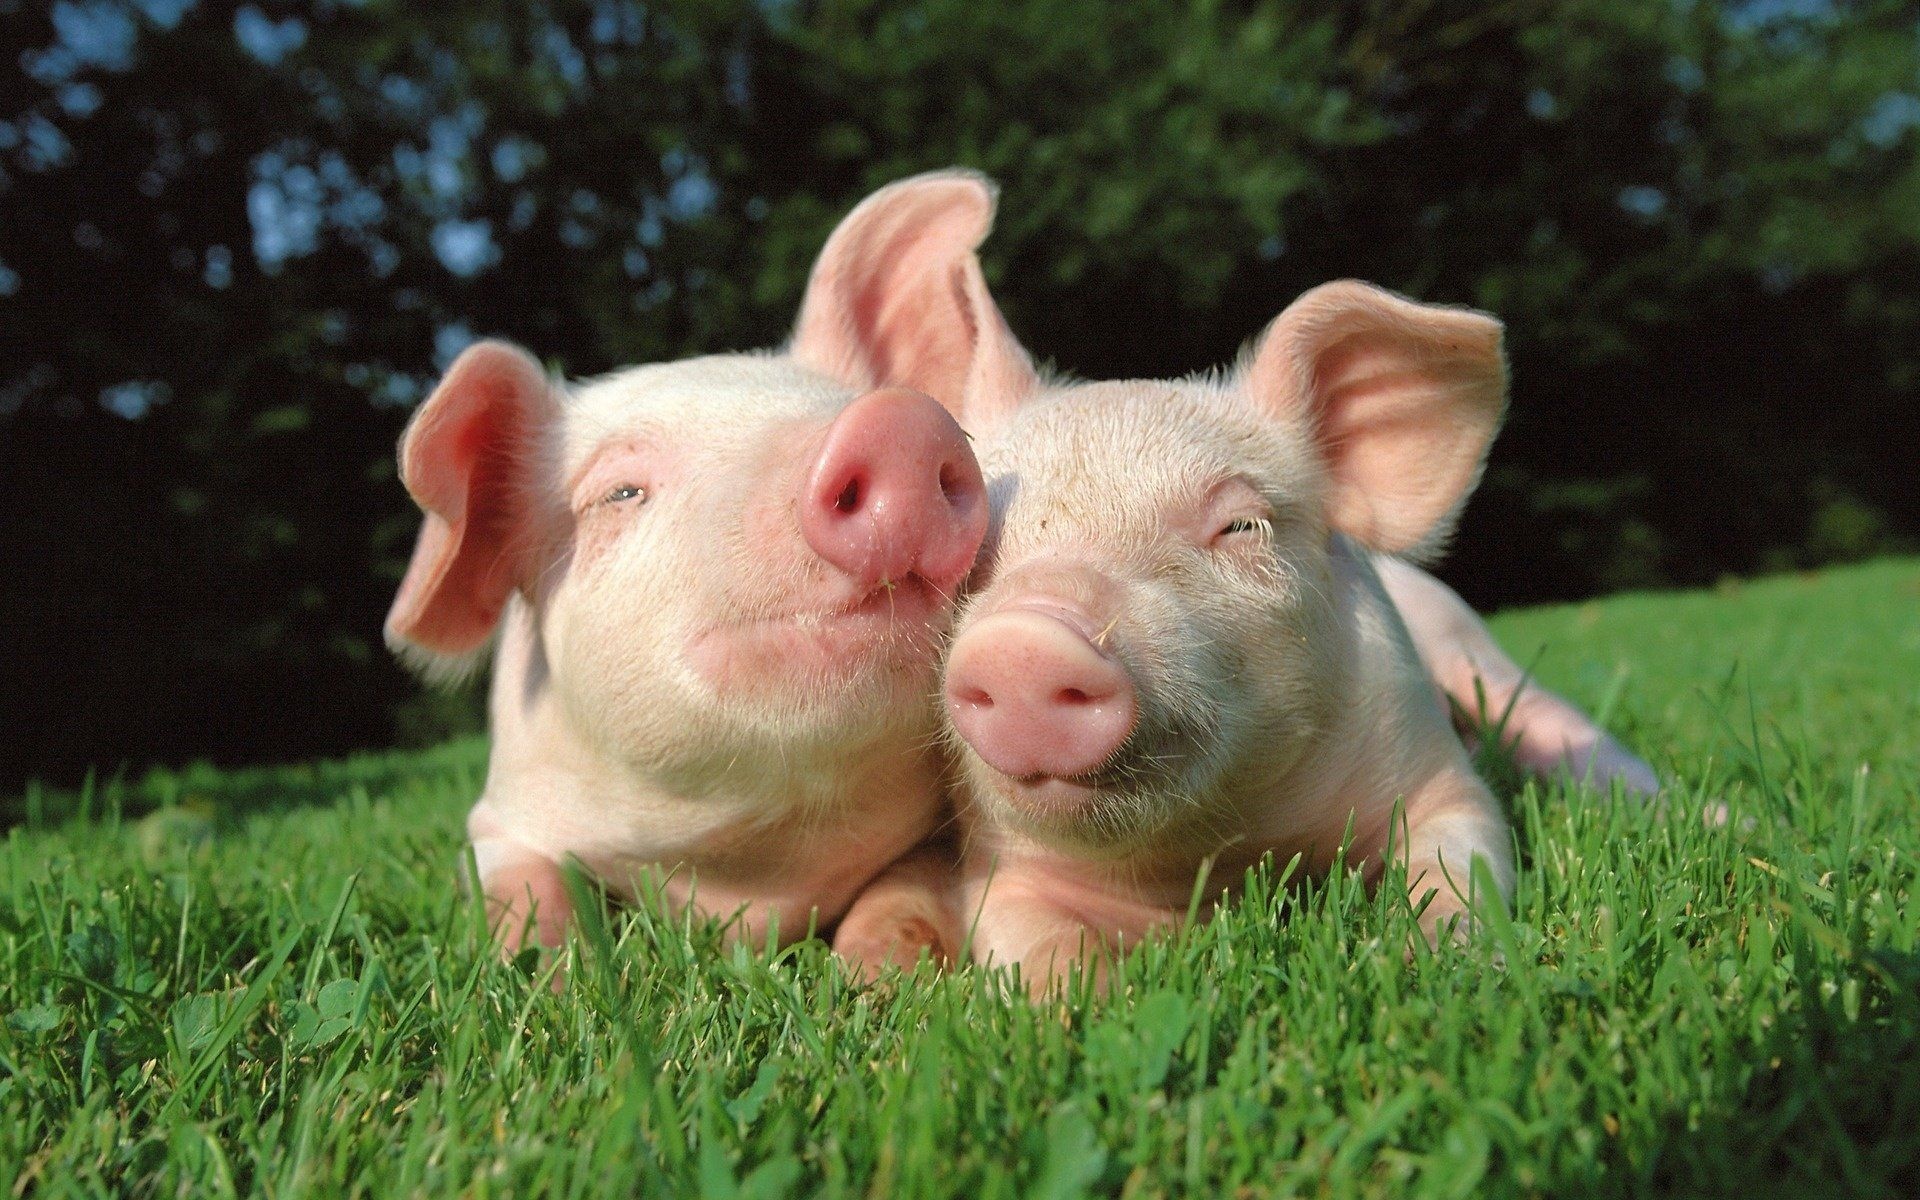 Baby pigs wallpapers, Cute and cuddly piglets, Charming backgrounds, Sweet and innocent, 1920x1200 HD Desktop